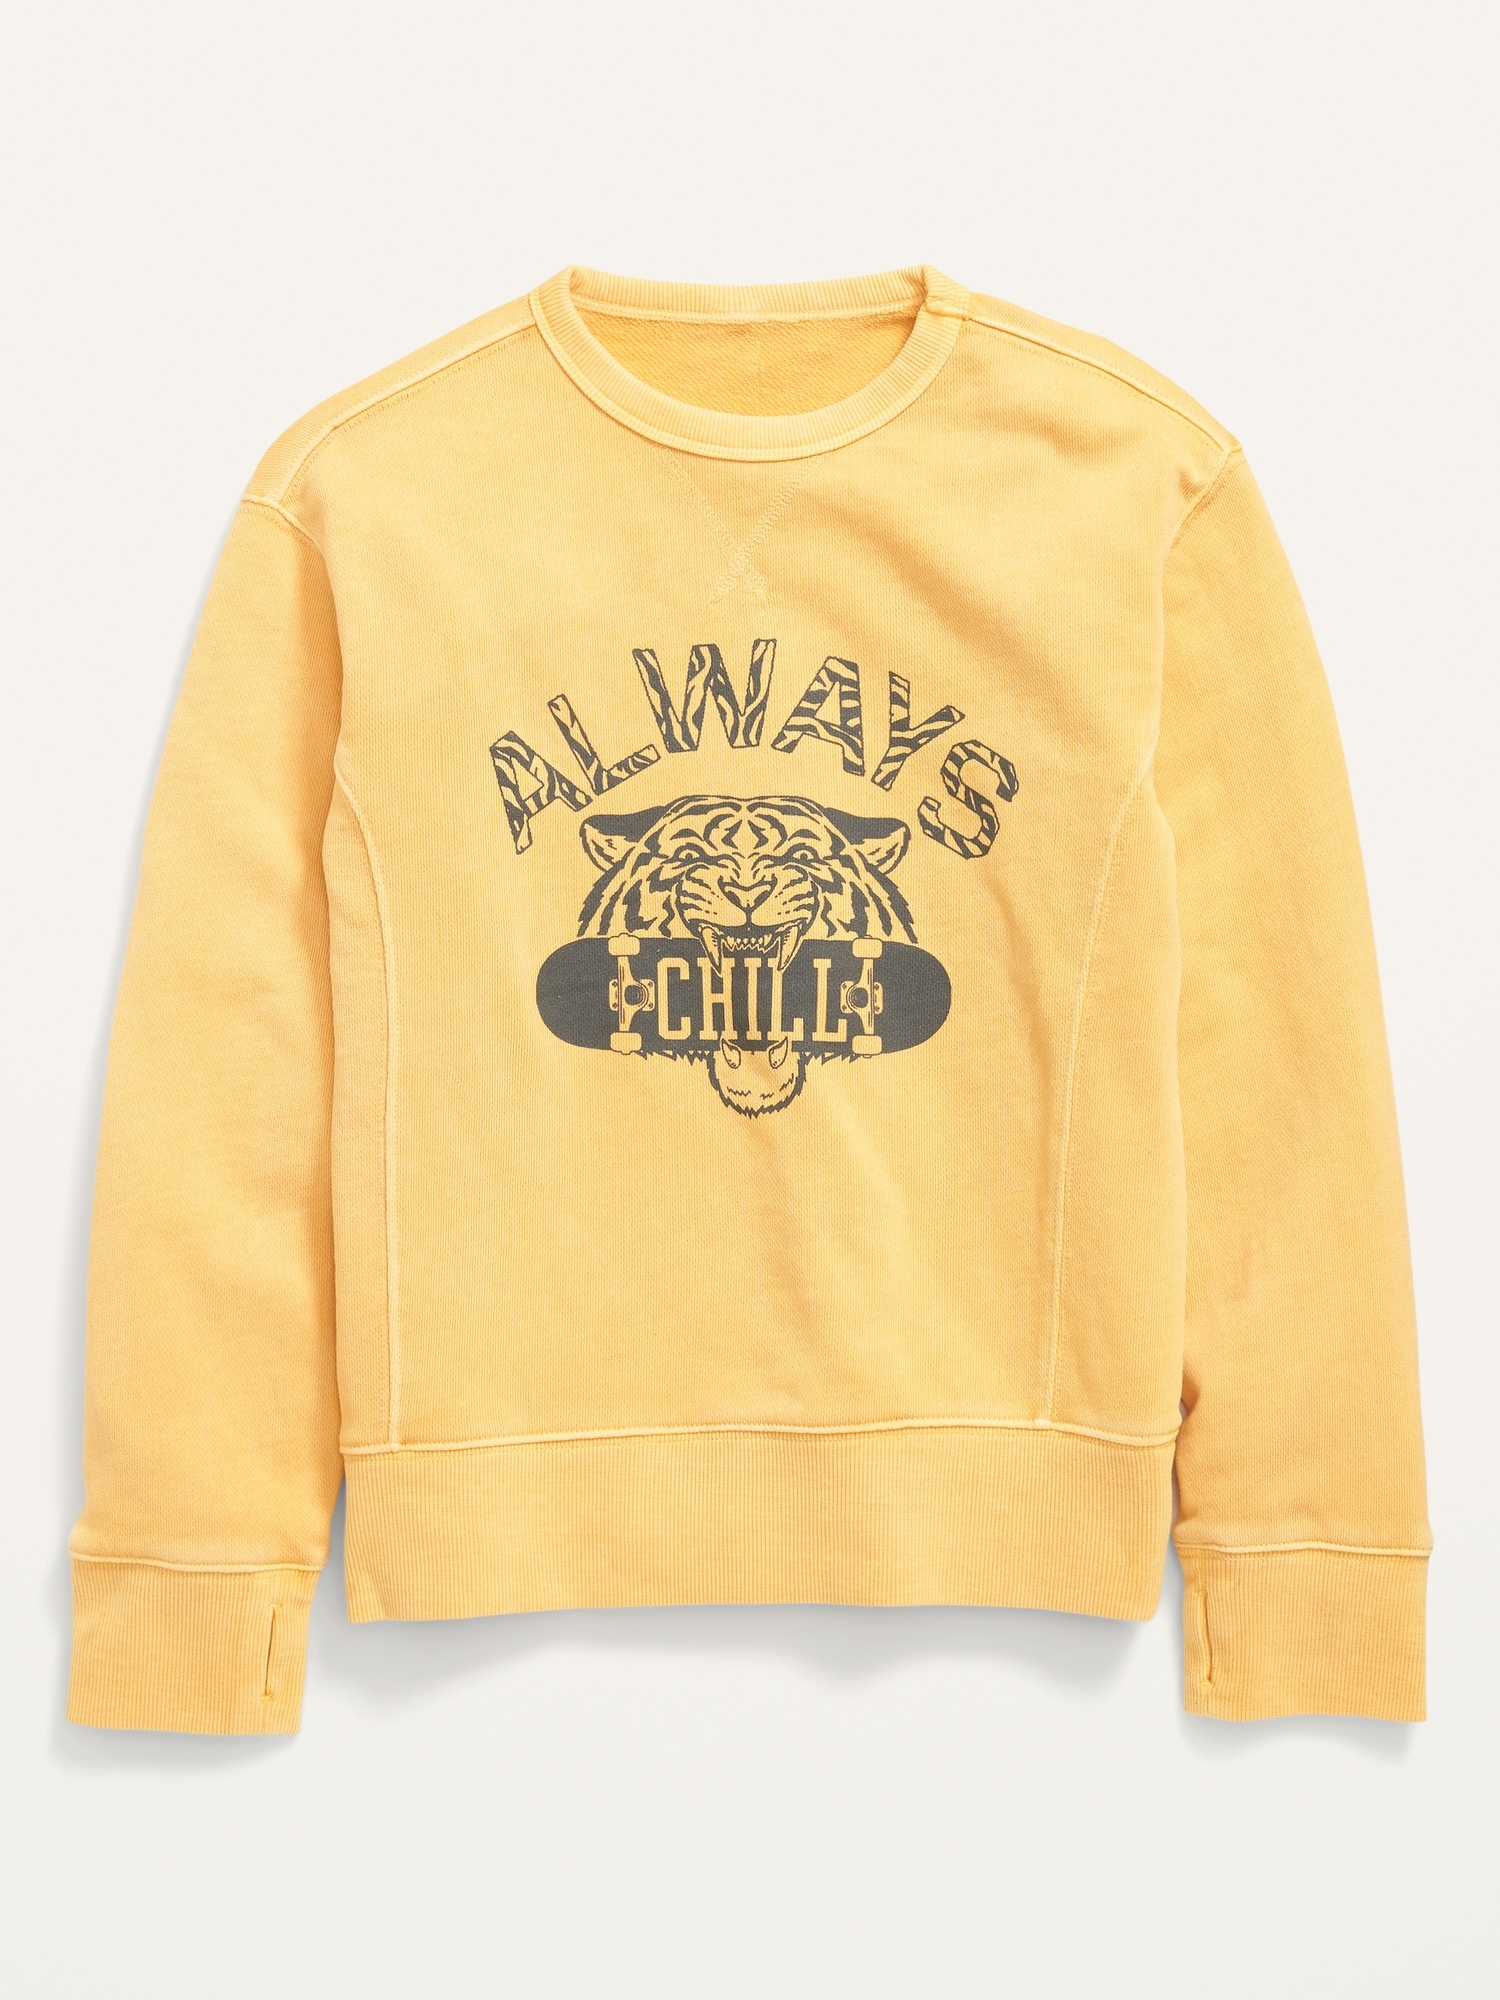 Vintage Graphic Sweatshirt For Boys | Old Navy